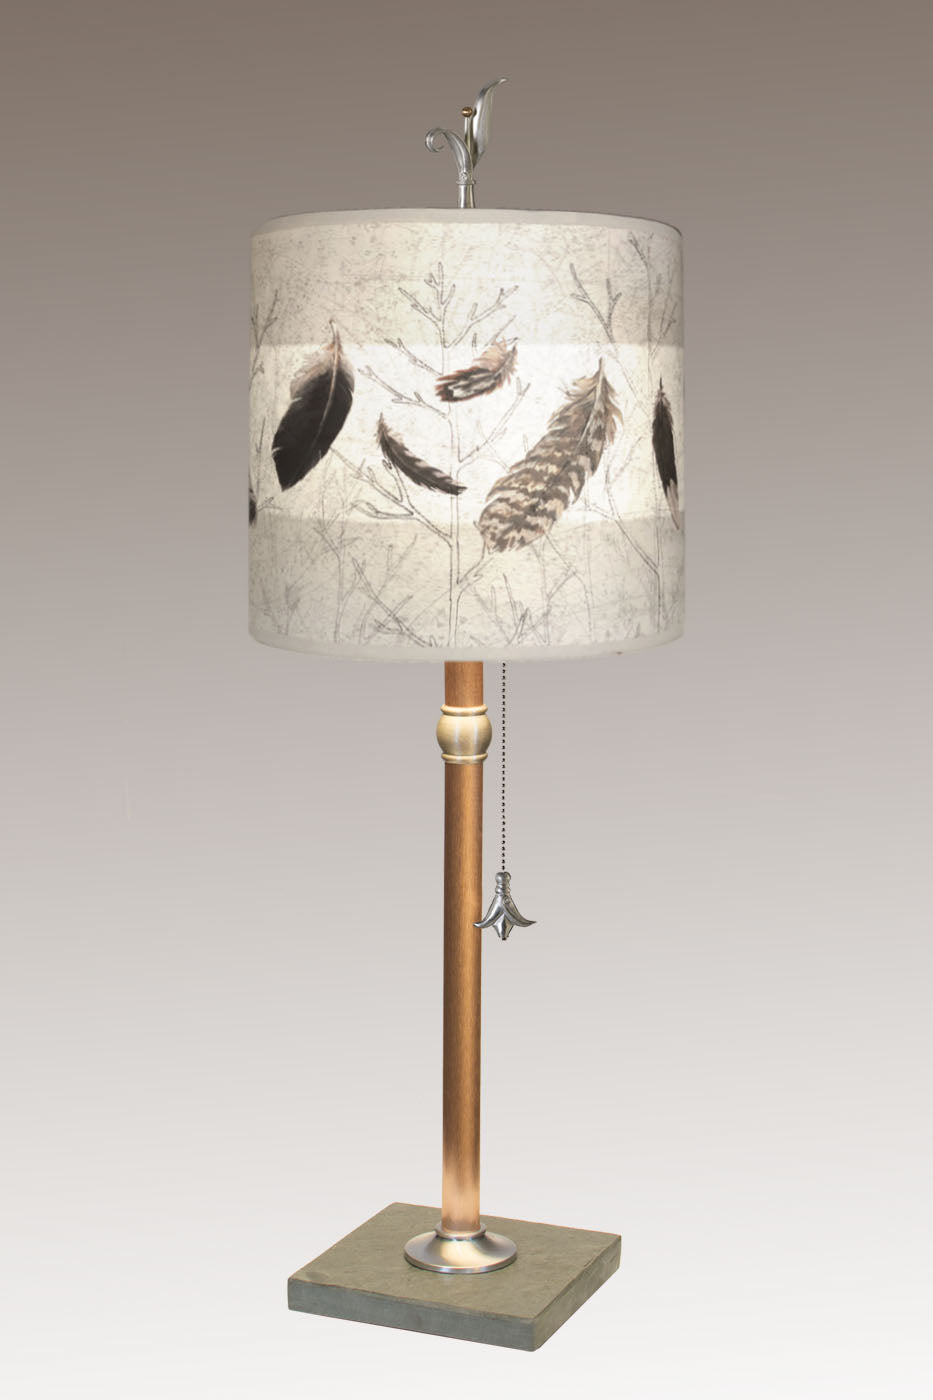 Janna Ugone &amp; Co Table Lamps Copper Table Lamp with Medium Drum Shade in Feathers in Pebble